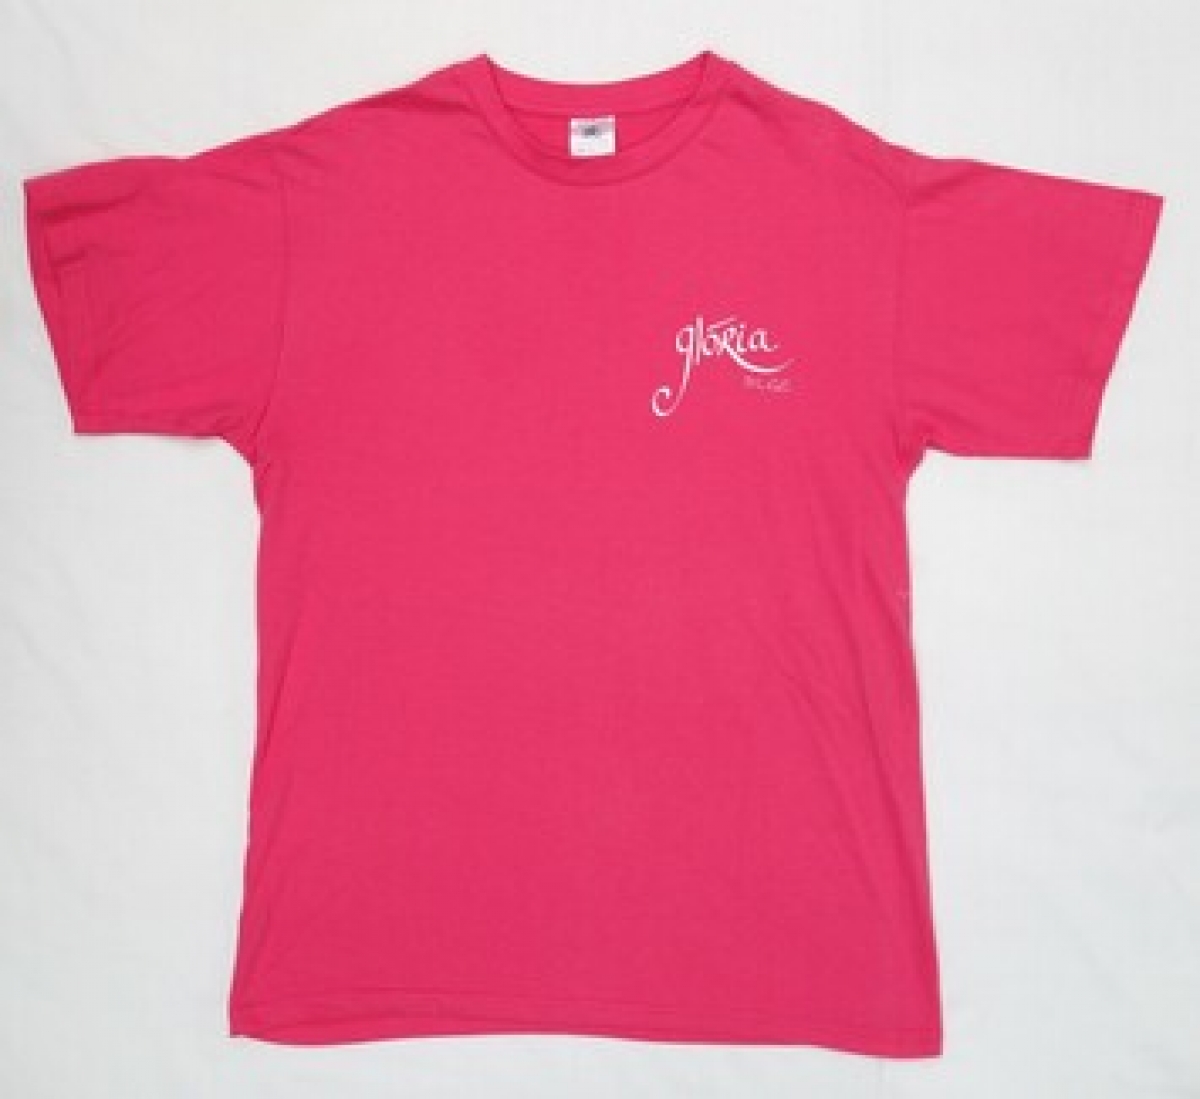 A pink t-shirt with the name GLÓRIA DLGC on the front and a large stylised shamrock with VARIOUS VOICES DUBLIN on the back. Ireland, early 21st century.